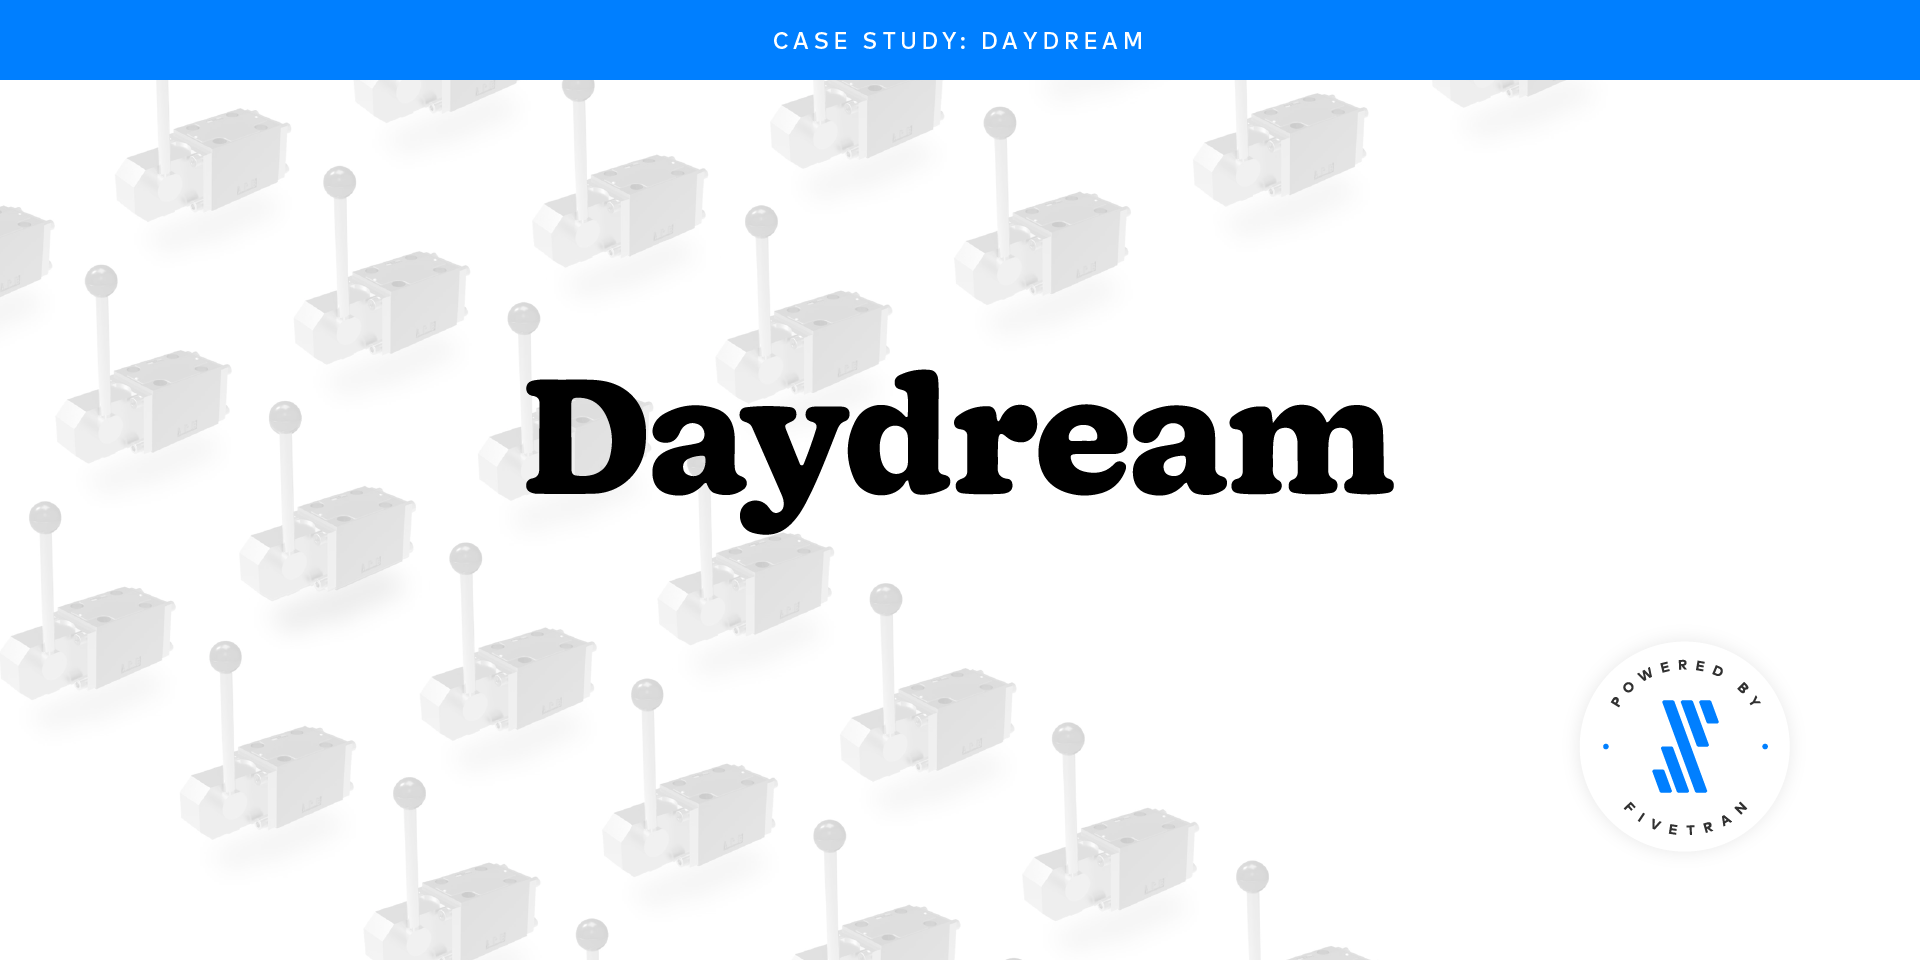 Fivetran accelerates time to market for Daydream, an early-stage startup